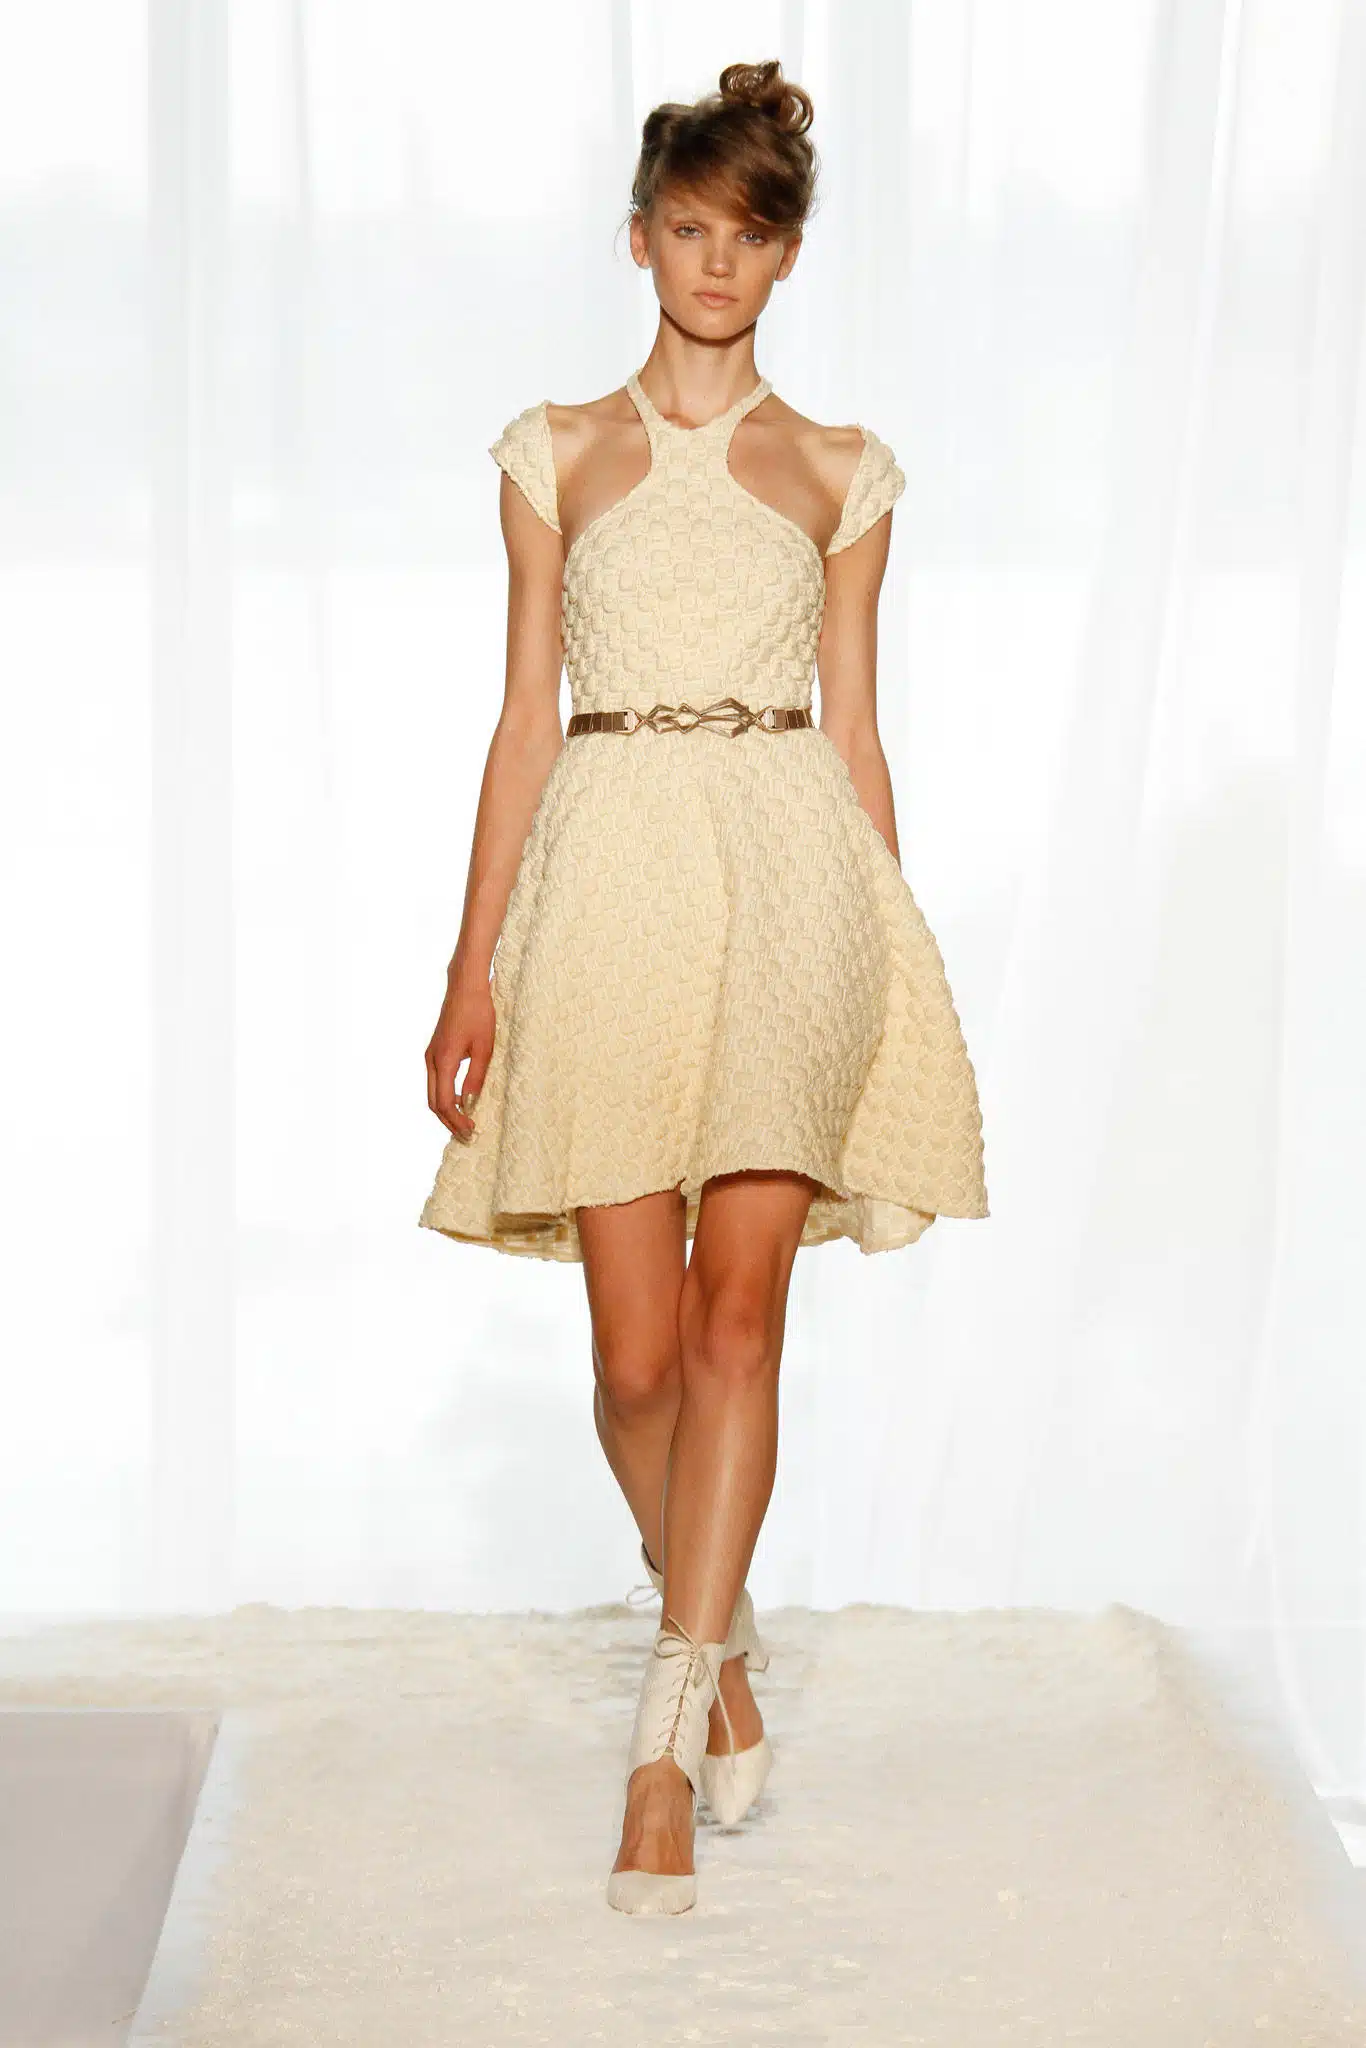 Image from SS13 SHOW Collection